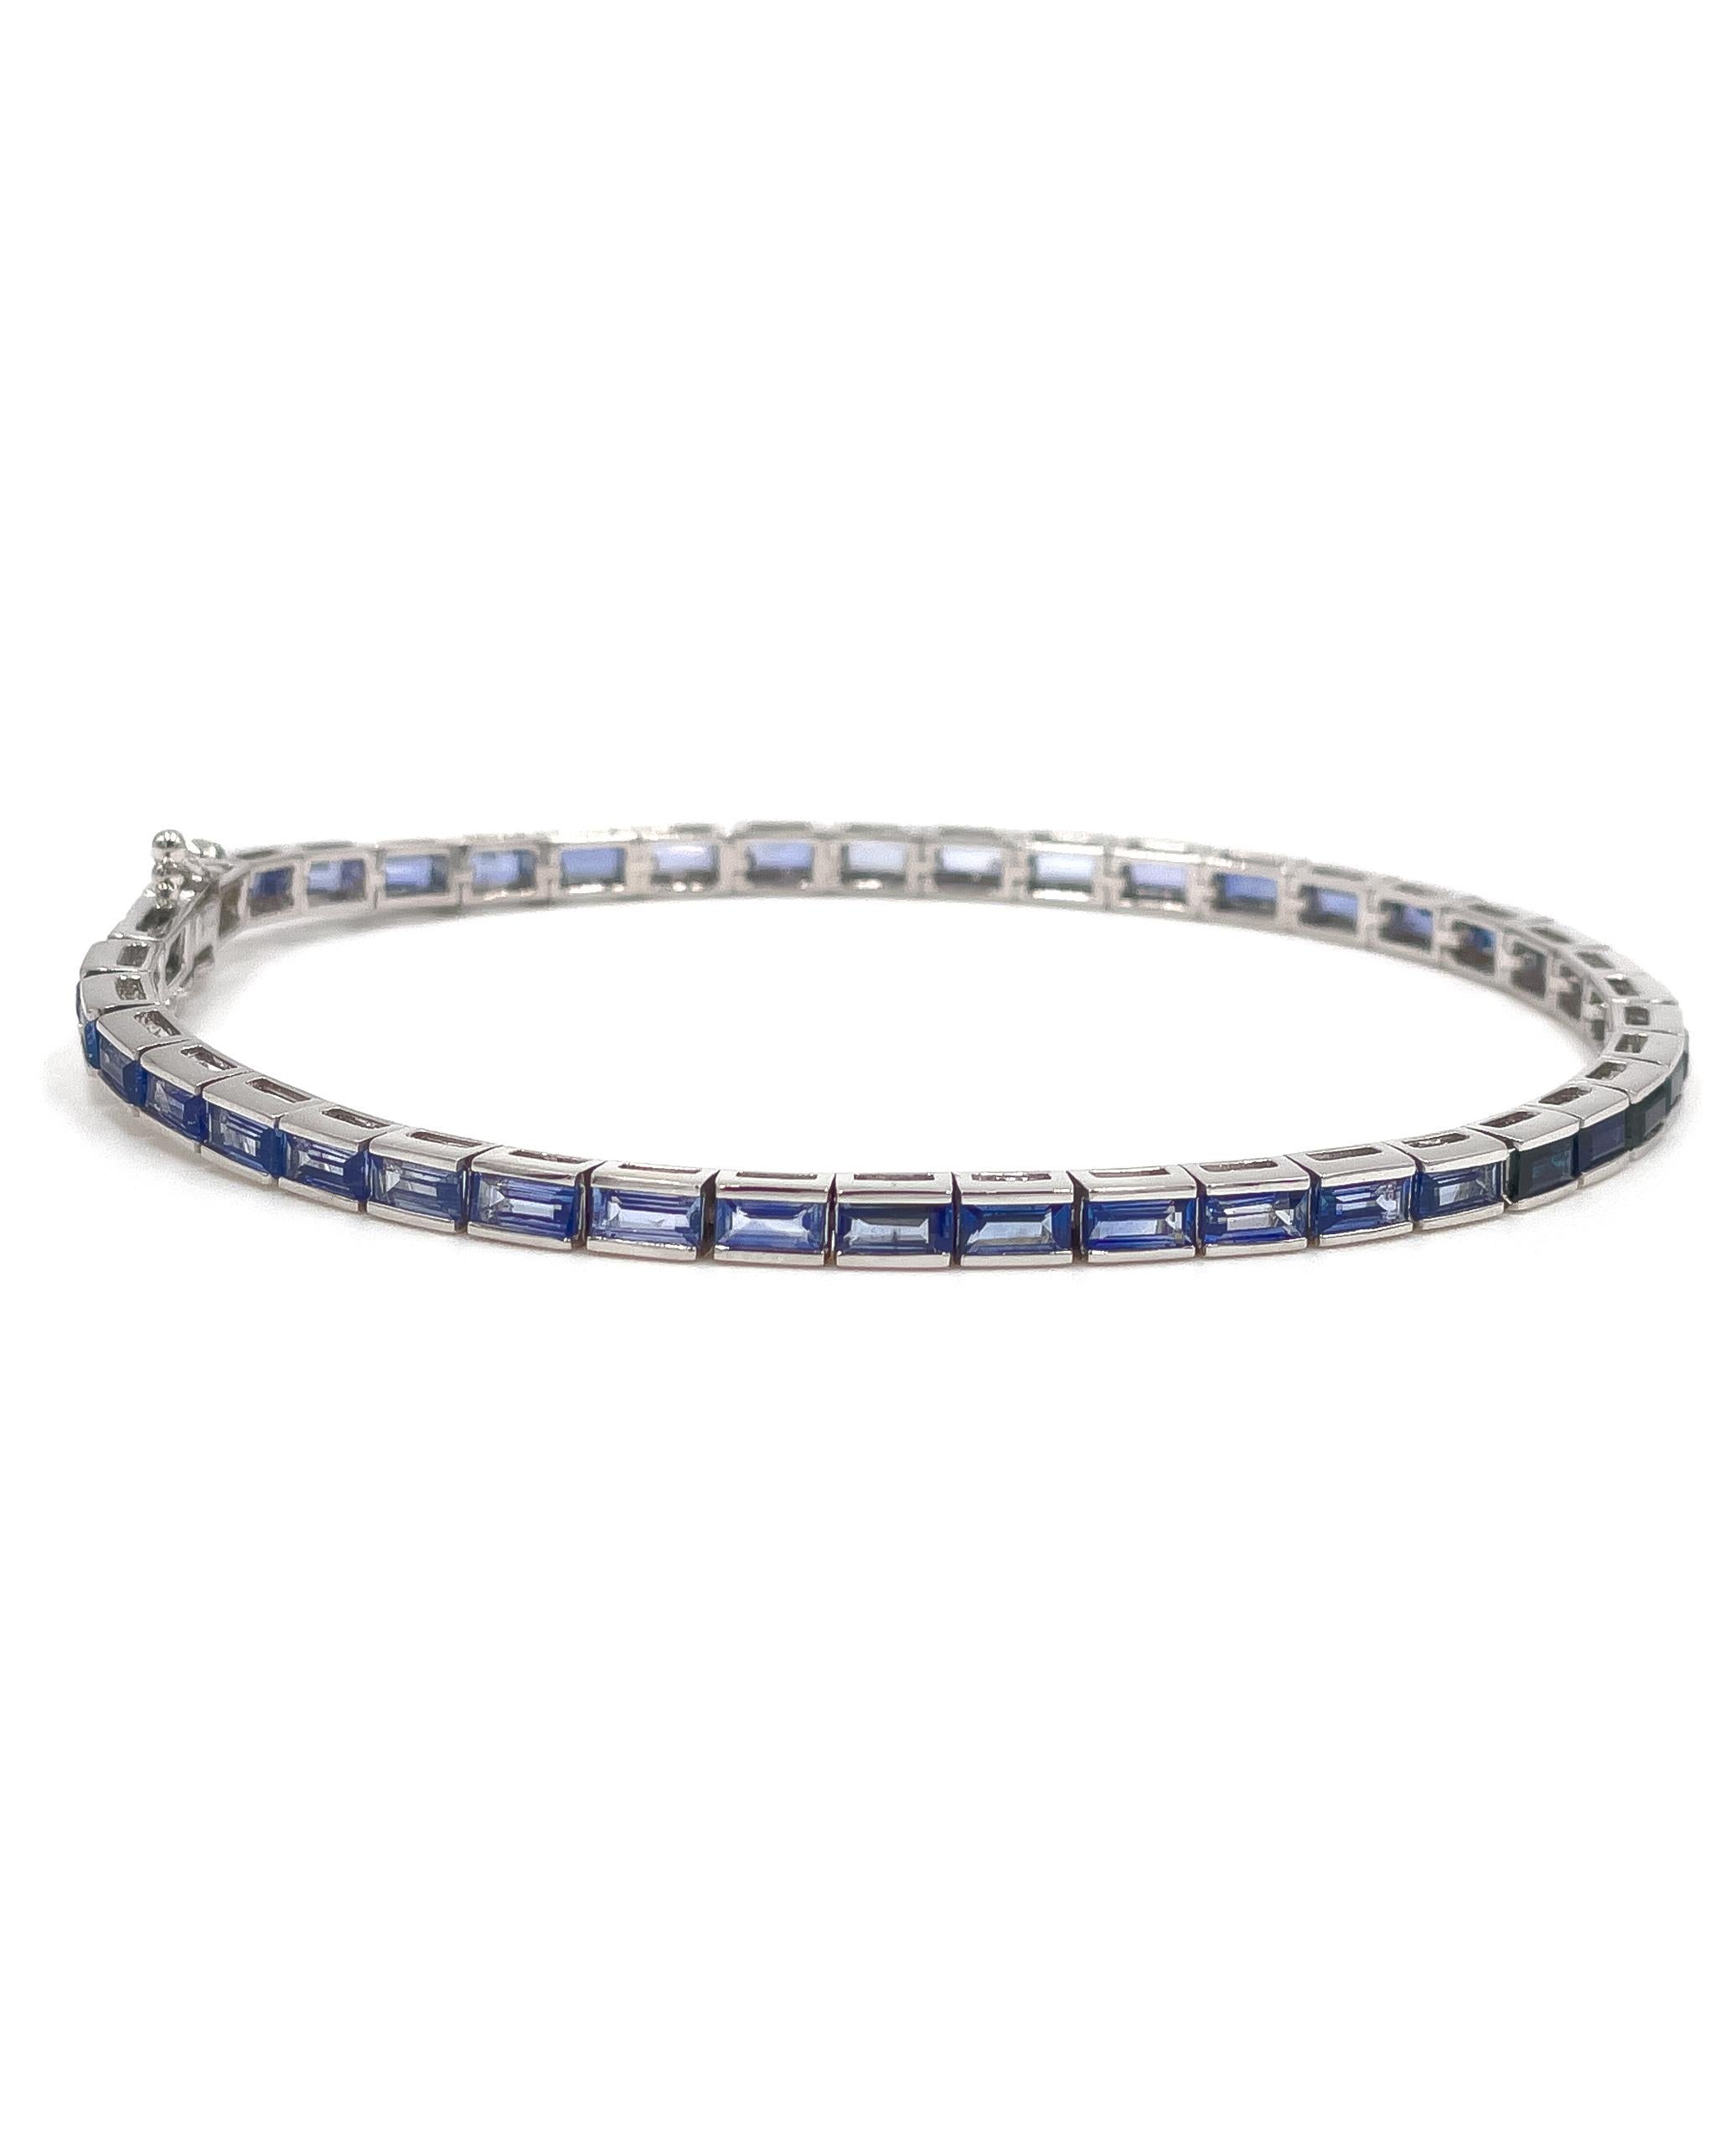 14K white gold line bracelet channel set with step-cut blue sapphires graduating in color. 

The sapphires weigh a total of 6.23 carats. 

The bracelet has a box clasp with two figure 8 safety clasps on either side.

Bracelet length: 7 inches.